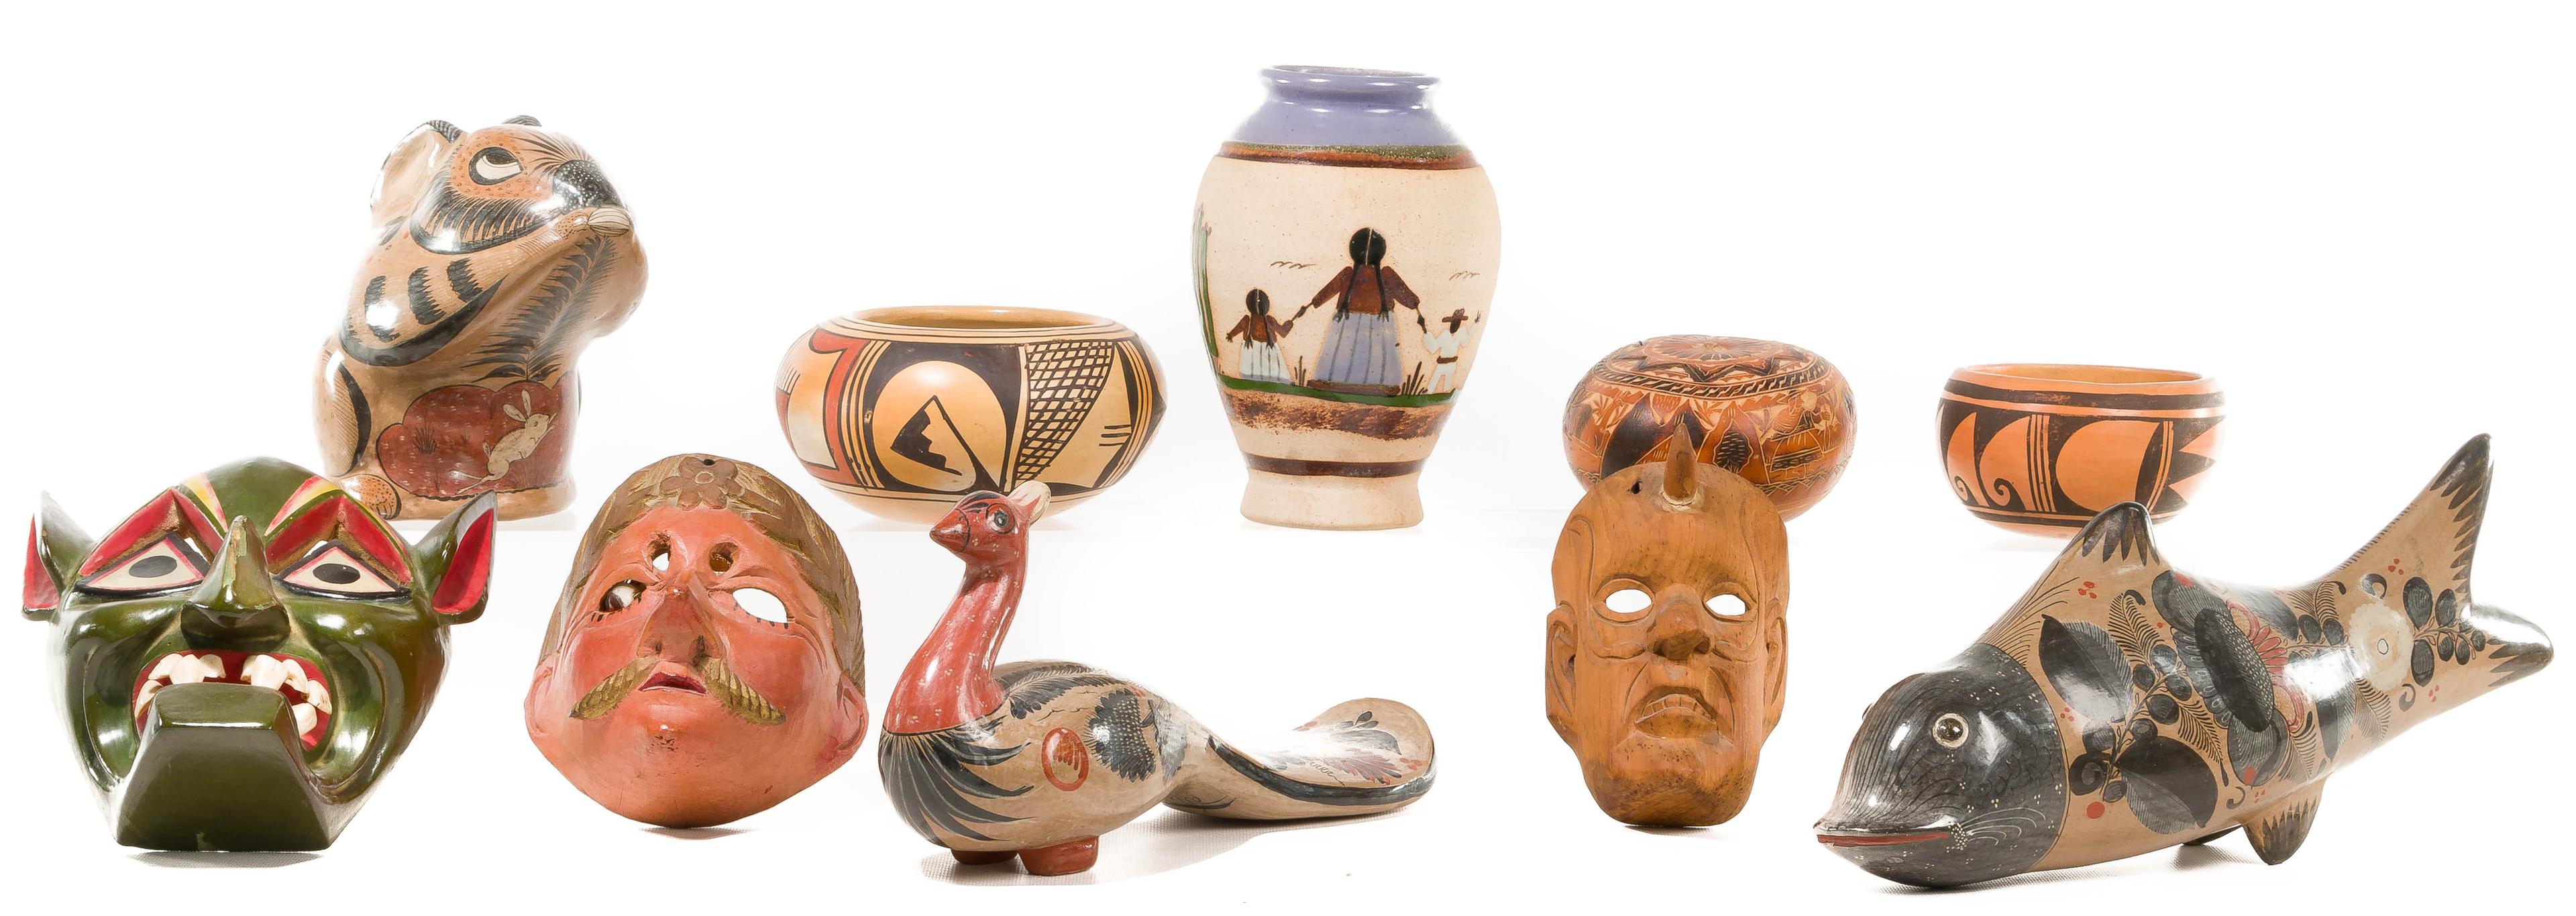 Southwestern and Mexican Decorative Assortment